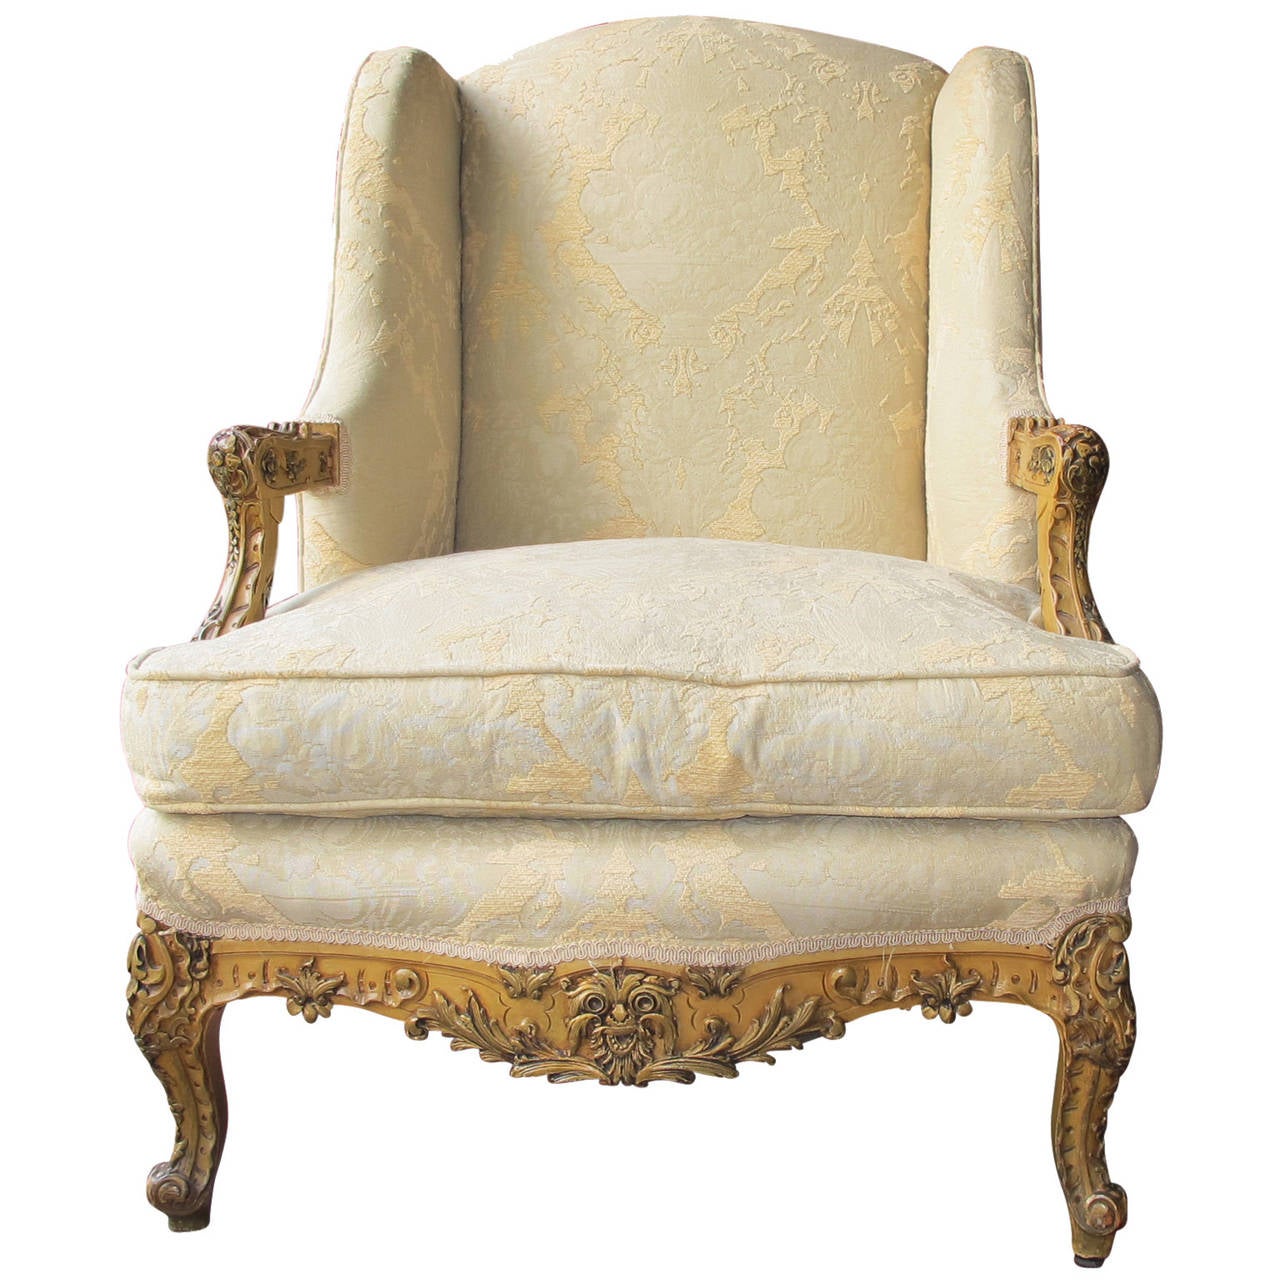 Beautiful Louis XIV style Bergere chair. Chair has intricate detailing with a down cushion. Currently upholstered in a neutral damask.